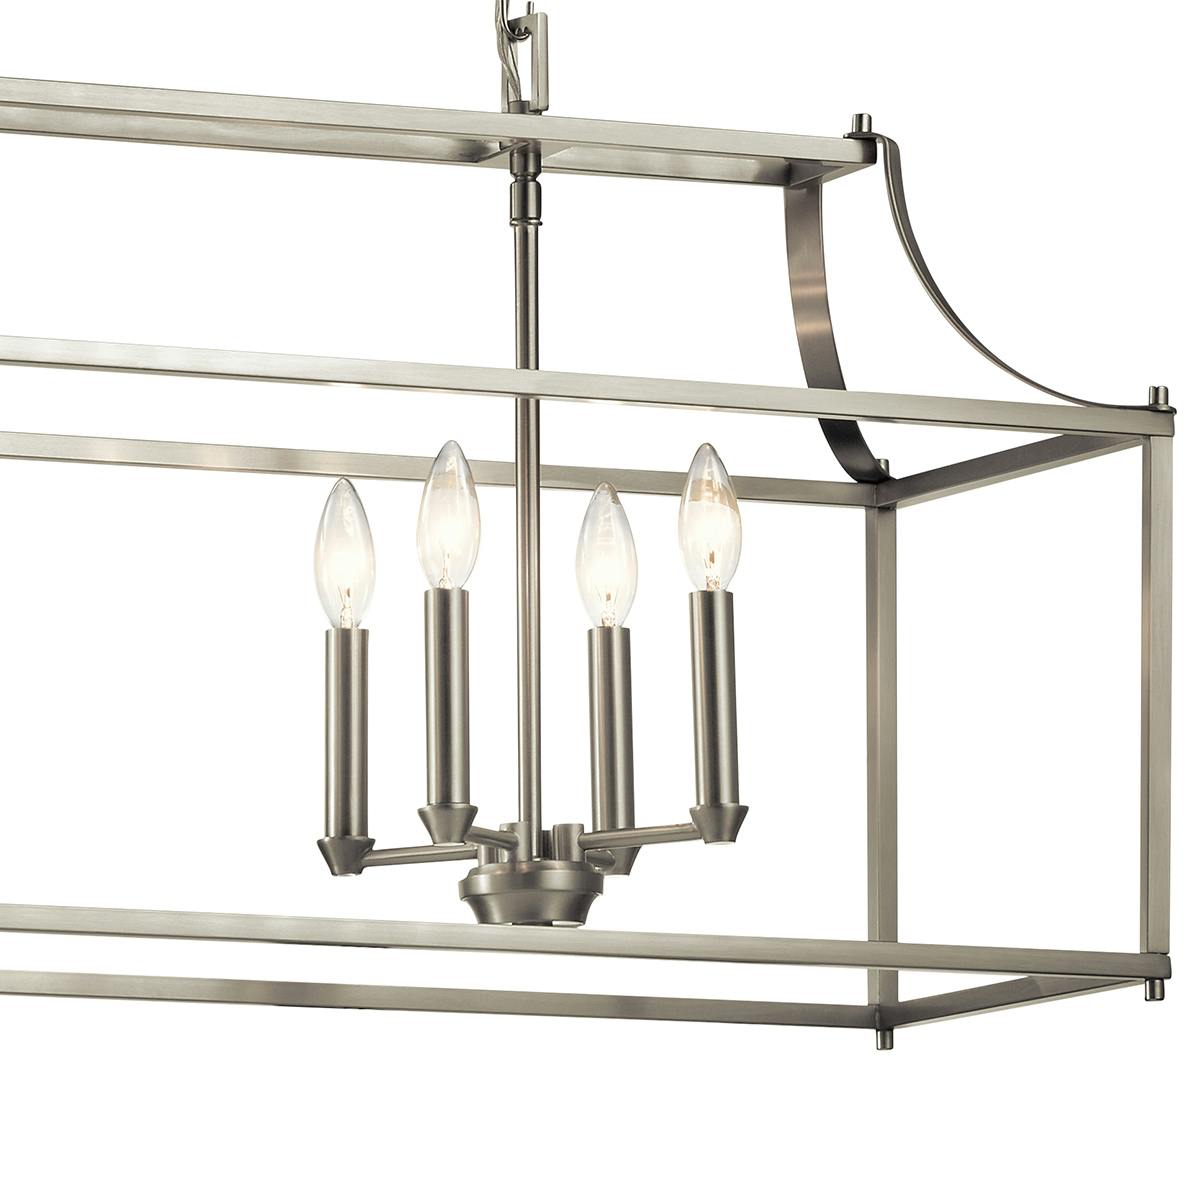 Close up view of the Morrigan 8 Light Linear Chandelier Nickel on a white background